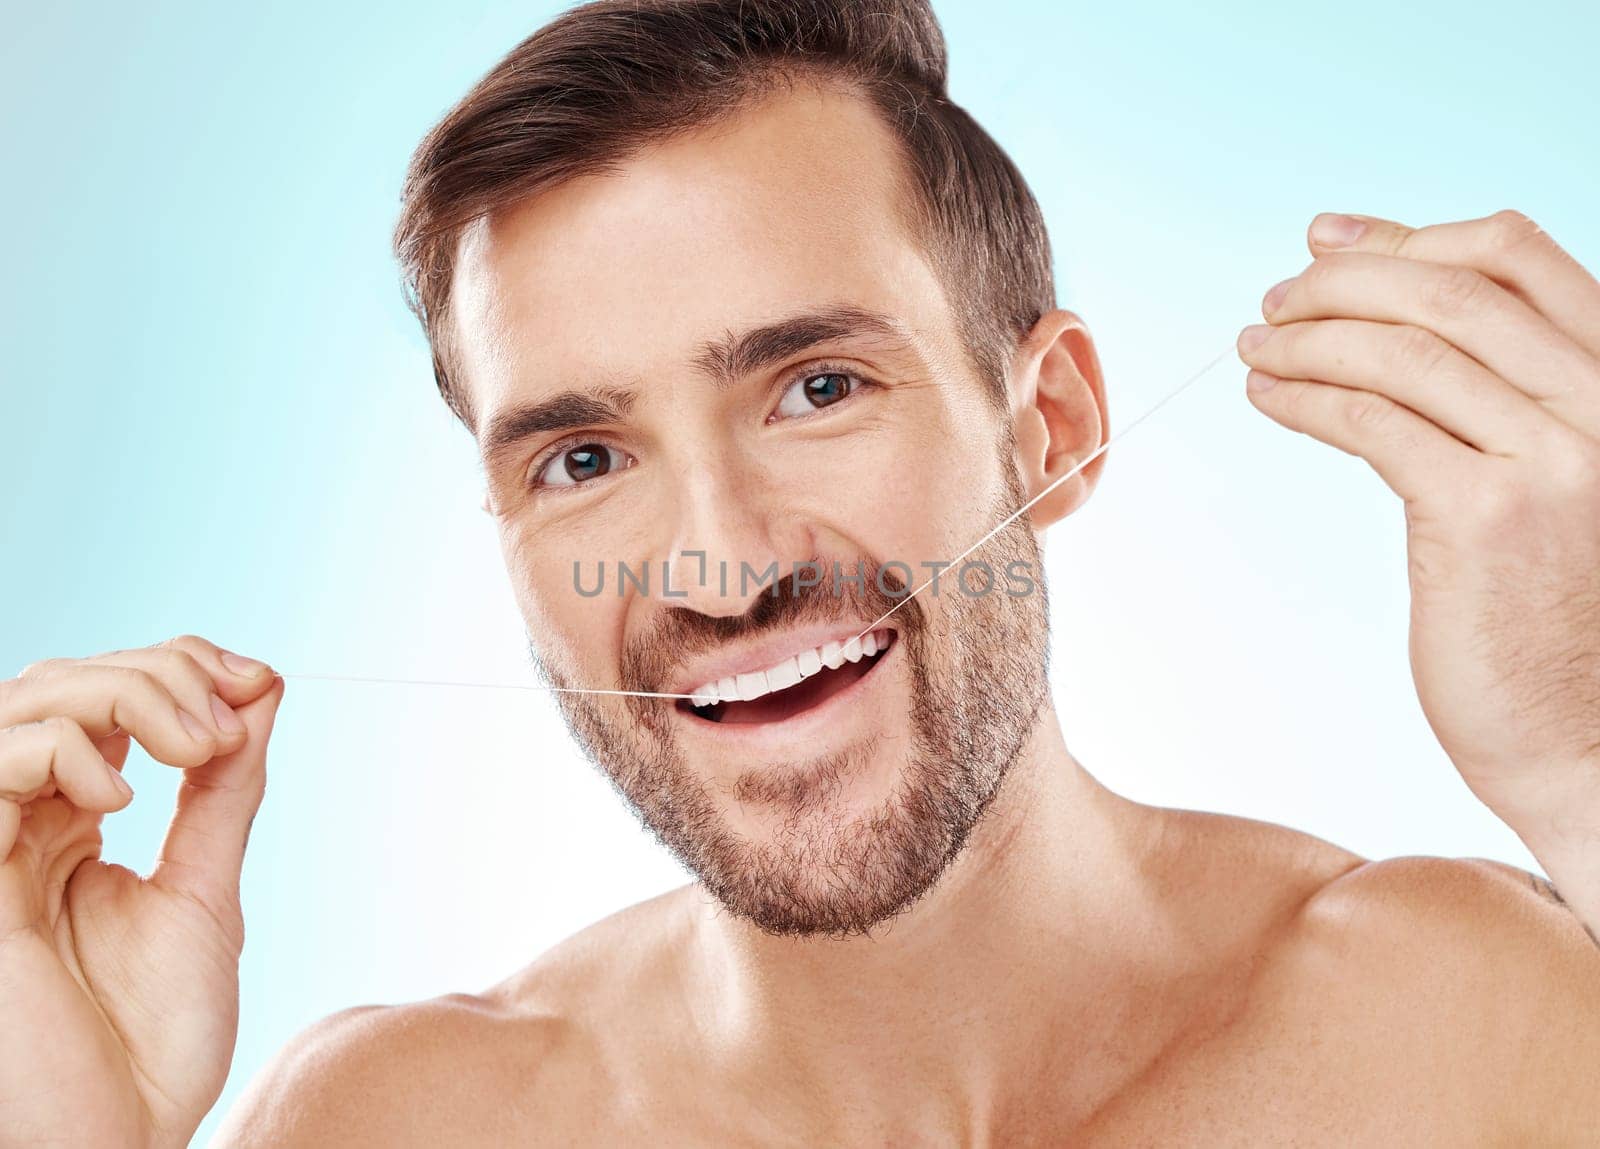 Face, portrait and man with dental floss in studio isolated on a blue background. Oral health, hygiene or happy male model flossing teeth for wellness, cleaning or fresh breath, cosmetics or gum care.